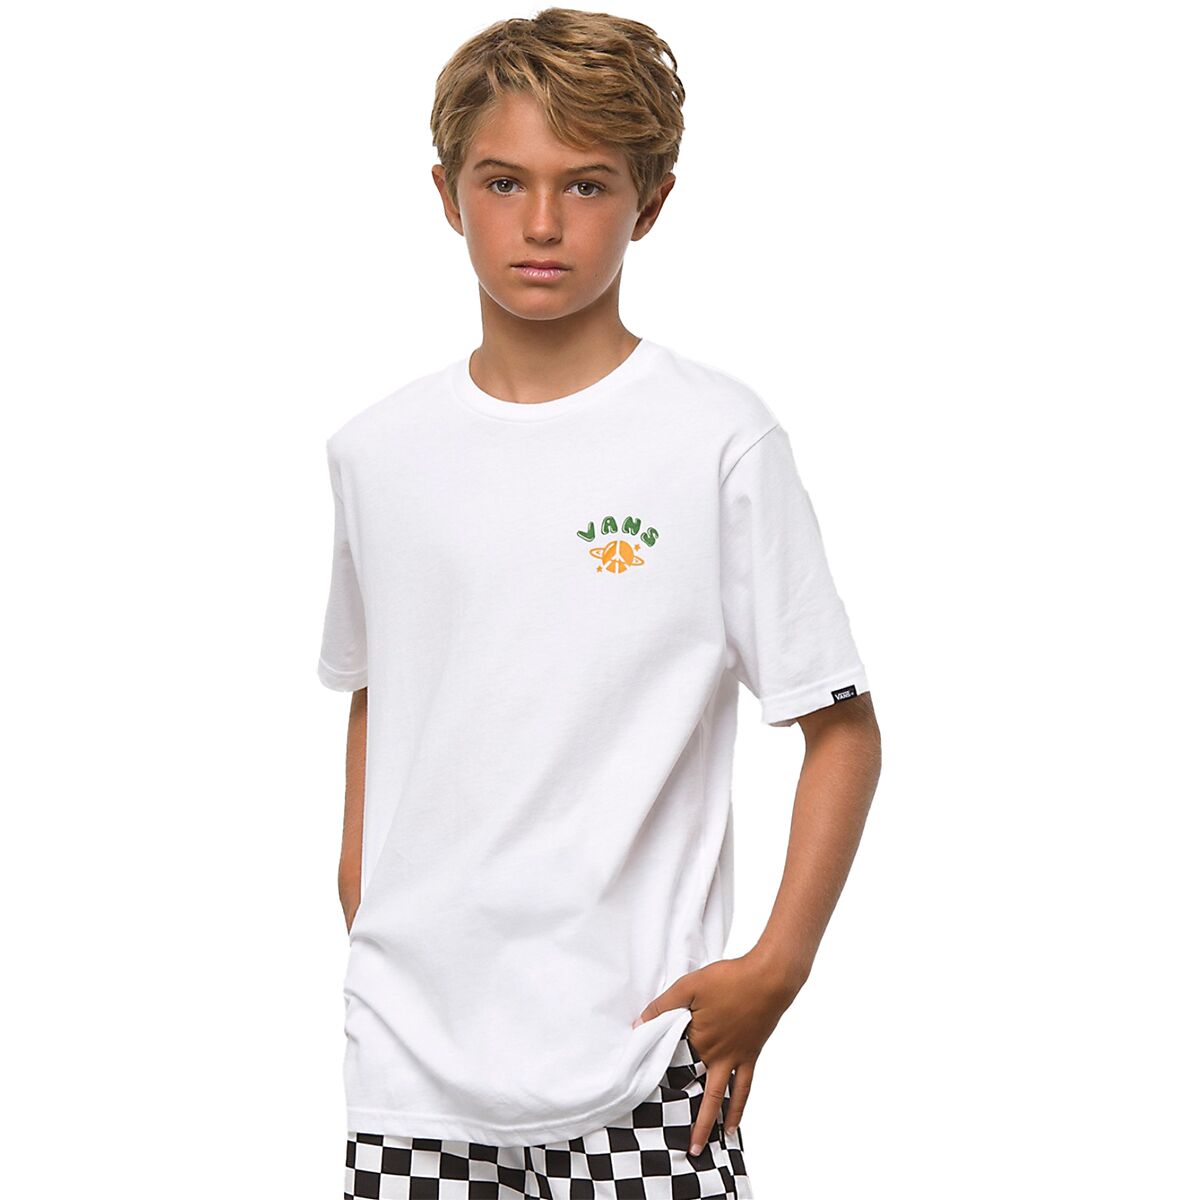 Vans Down To Earth Short-Sleeve Graphic T-Shirt - Boys'